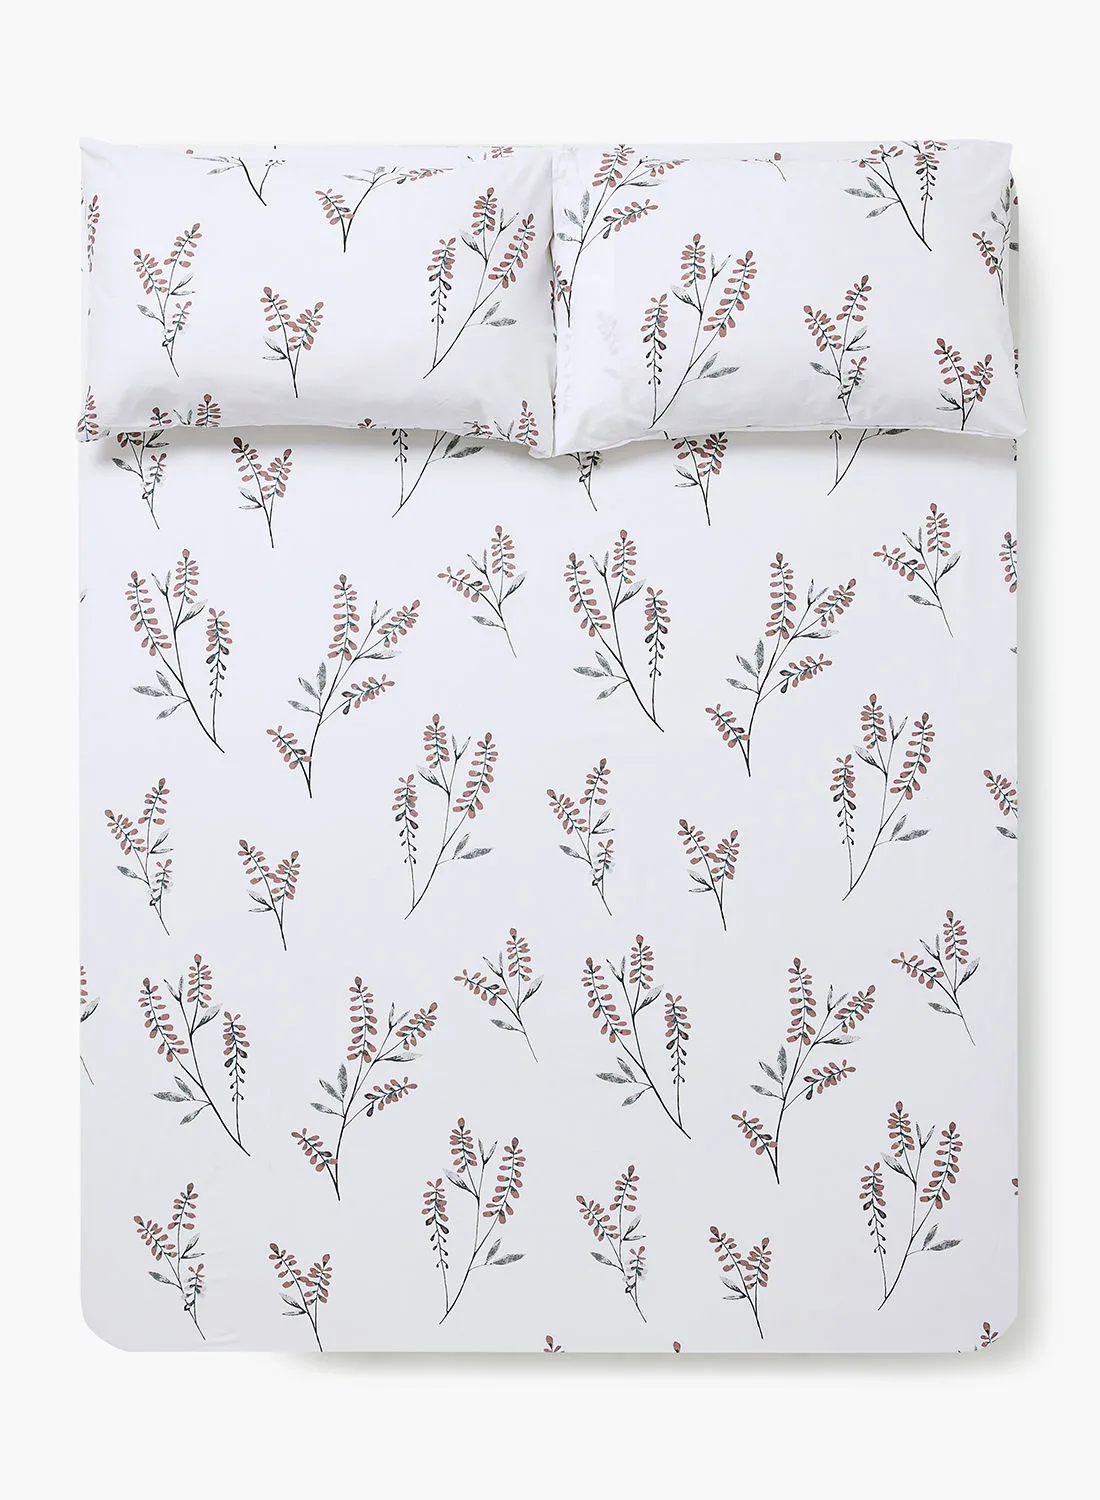 Amal Fitted Bedsheet Set Single Size High Quality 100% Cotton Percale 144 TC Light Weight Everyday Use 1 Bed Sheet And 2 Pillow Cases Printed White/Leaves